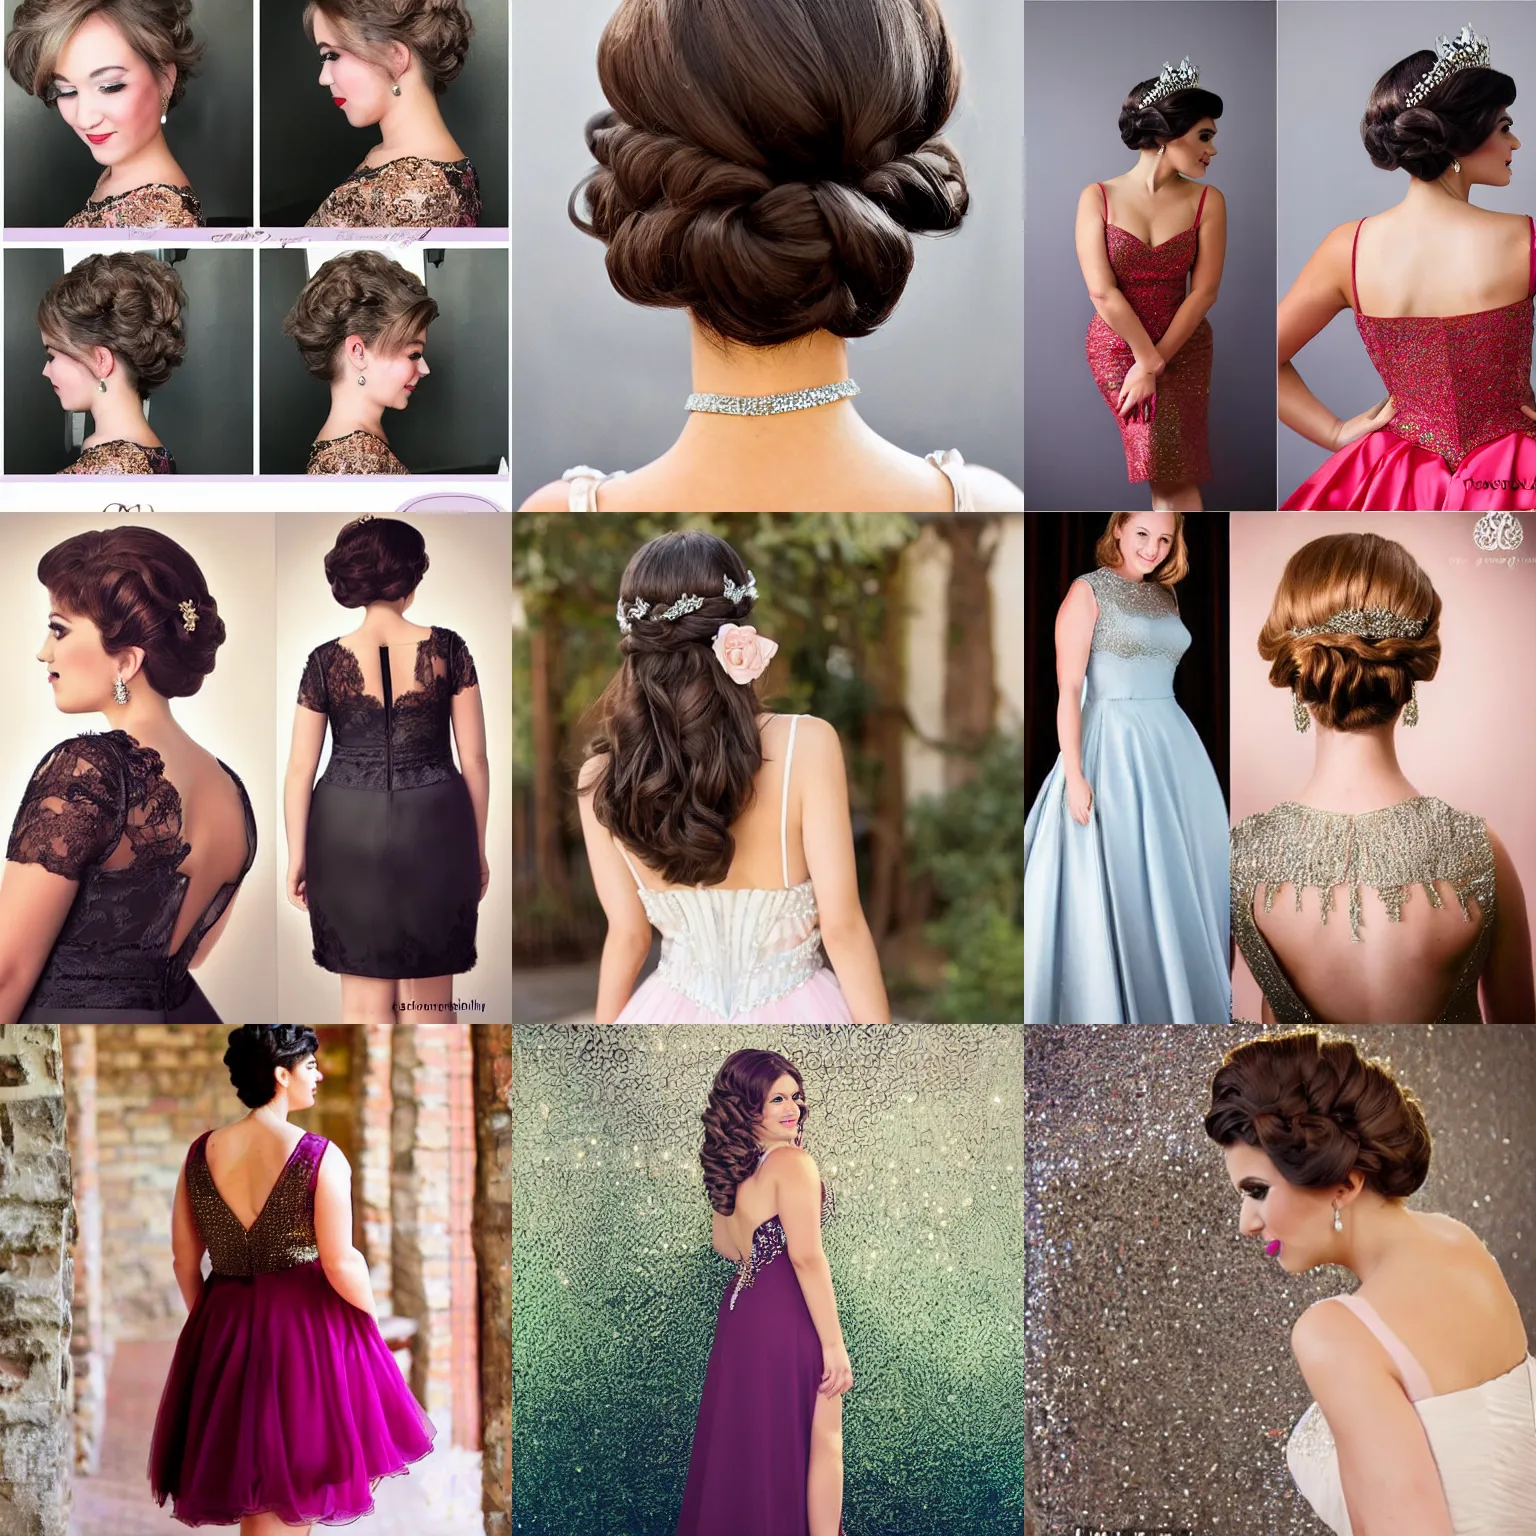 EASY UPDO WEDDING HAIRSTYLE FOR LONG HAIR - Alex Gaboury